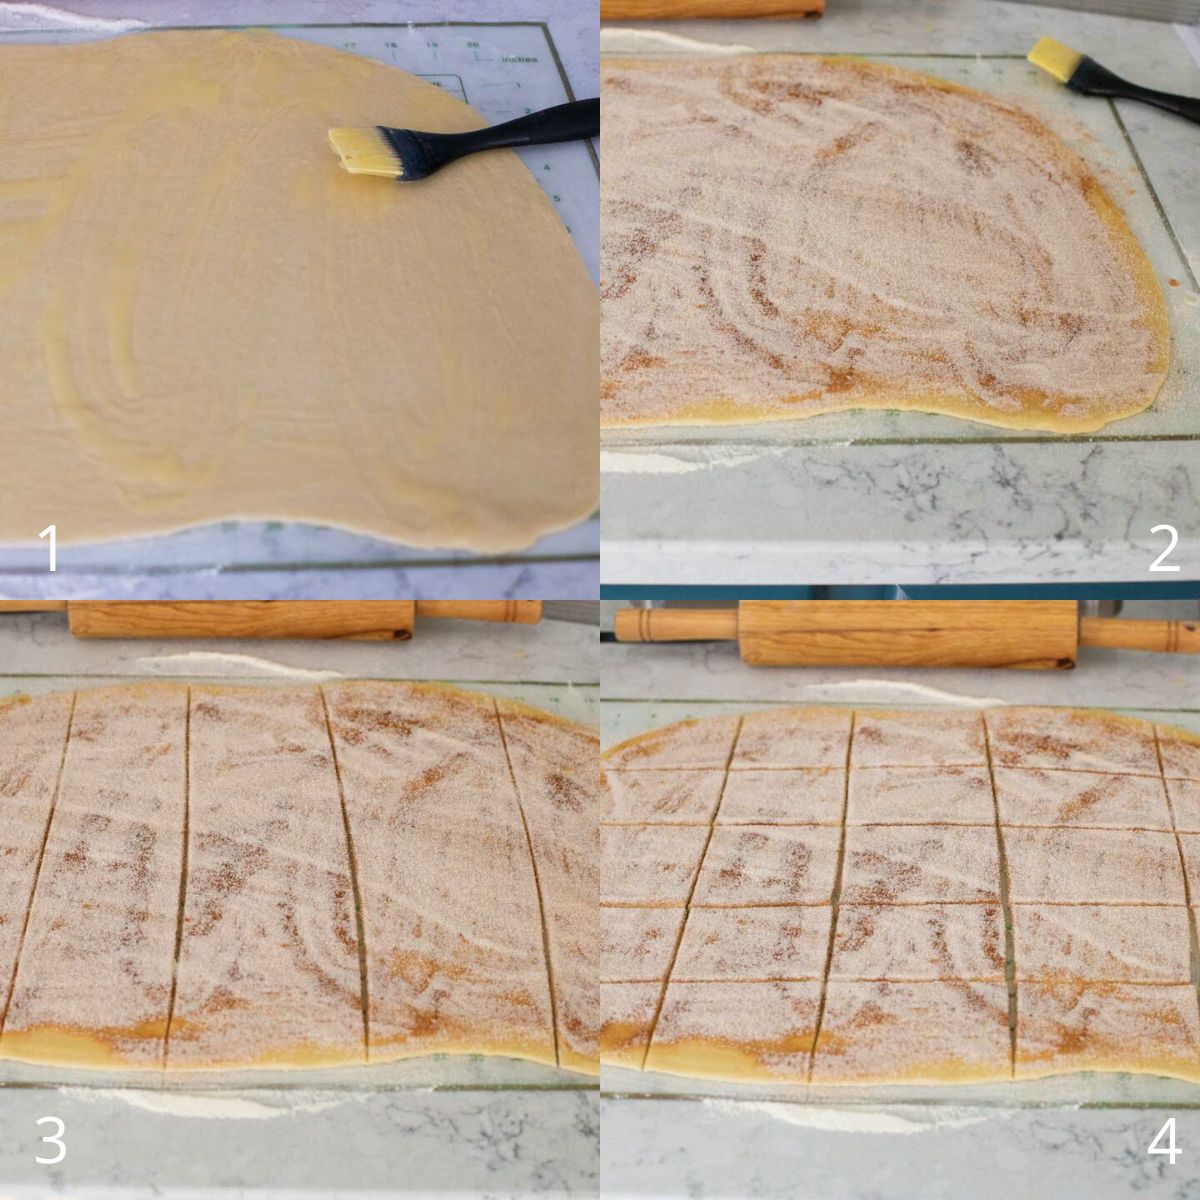 Photos show the steps to prep the dough for the baking pan.